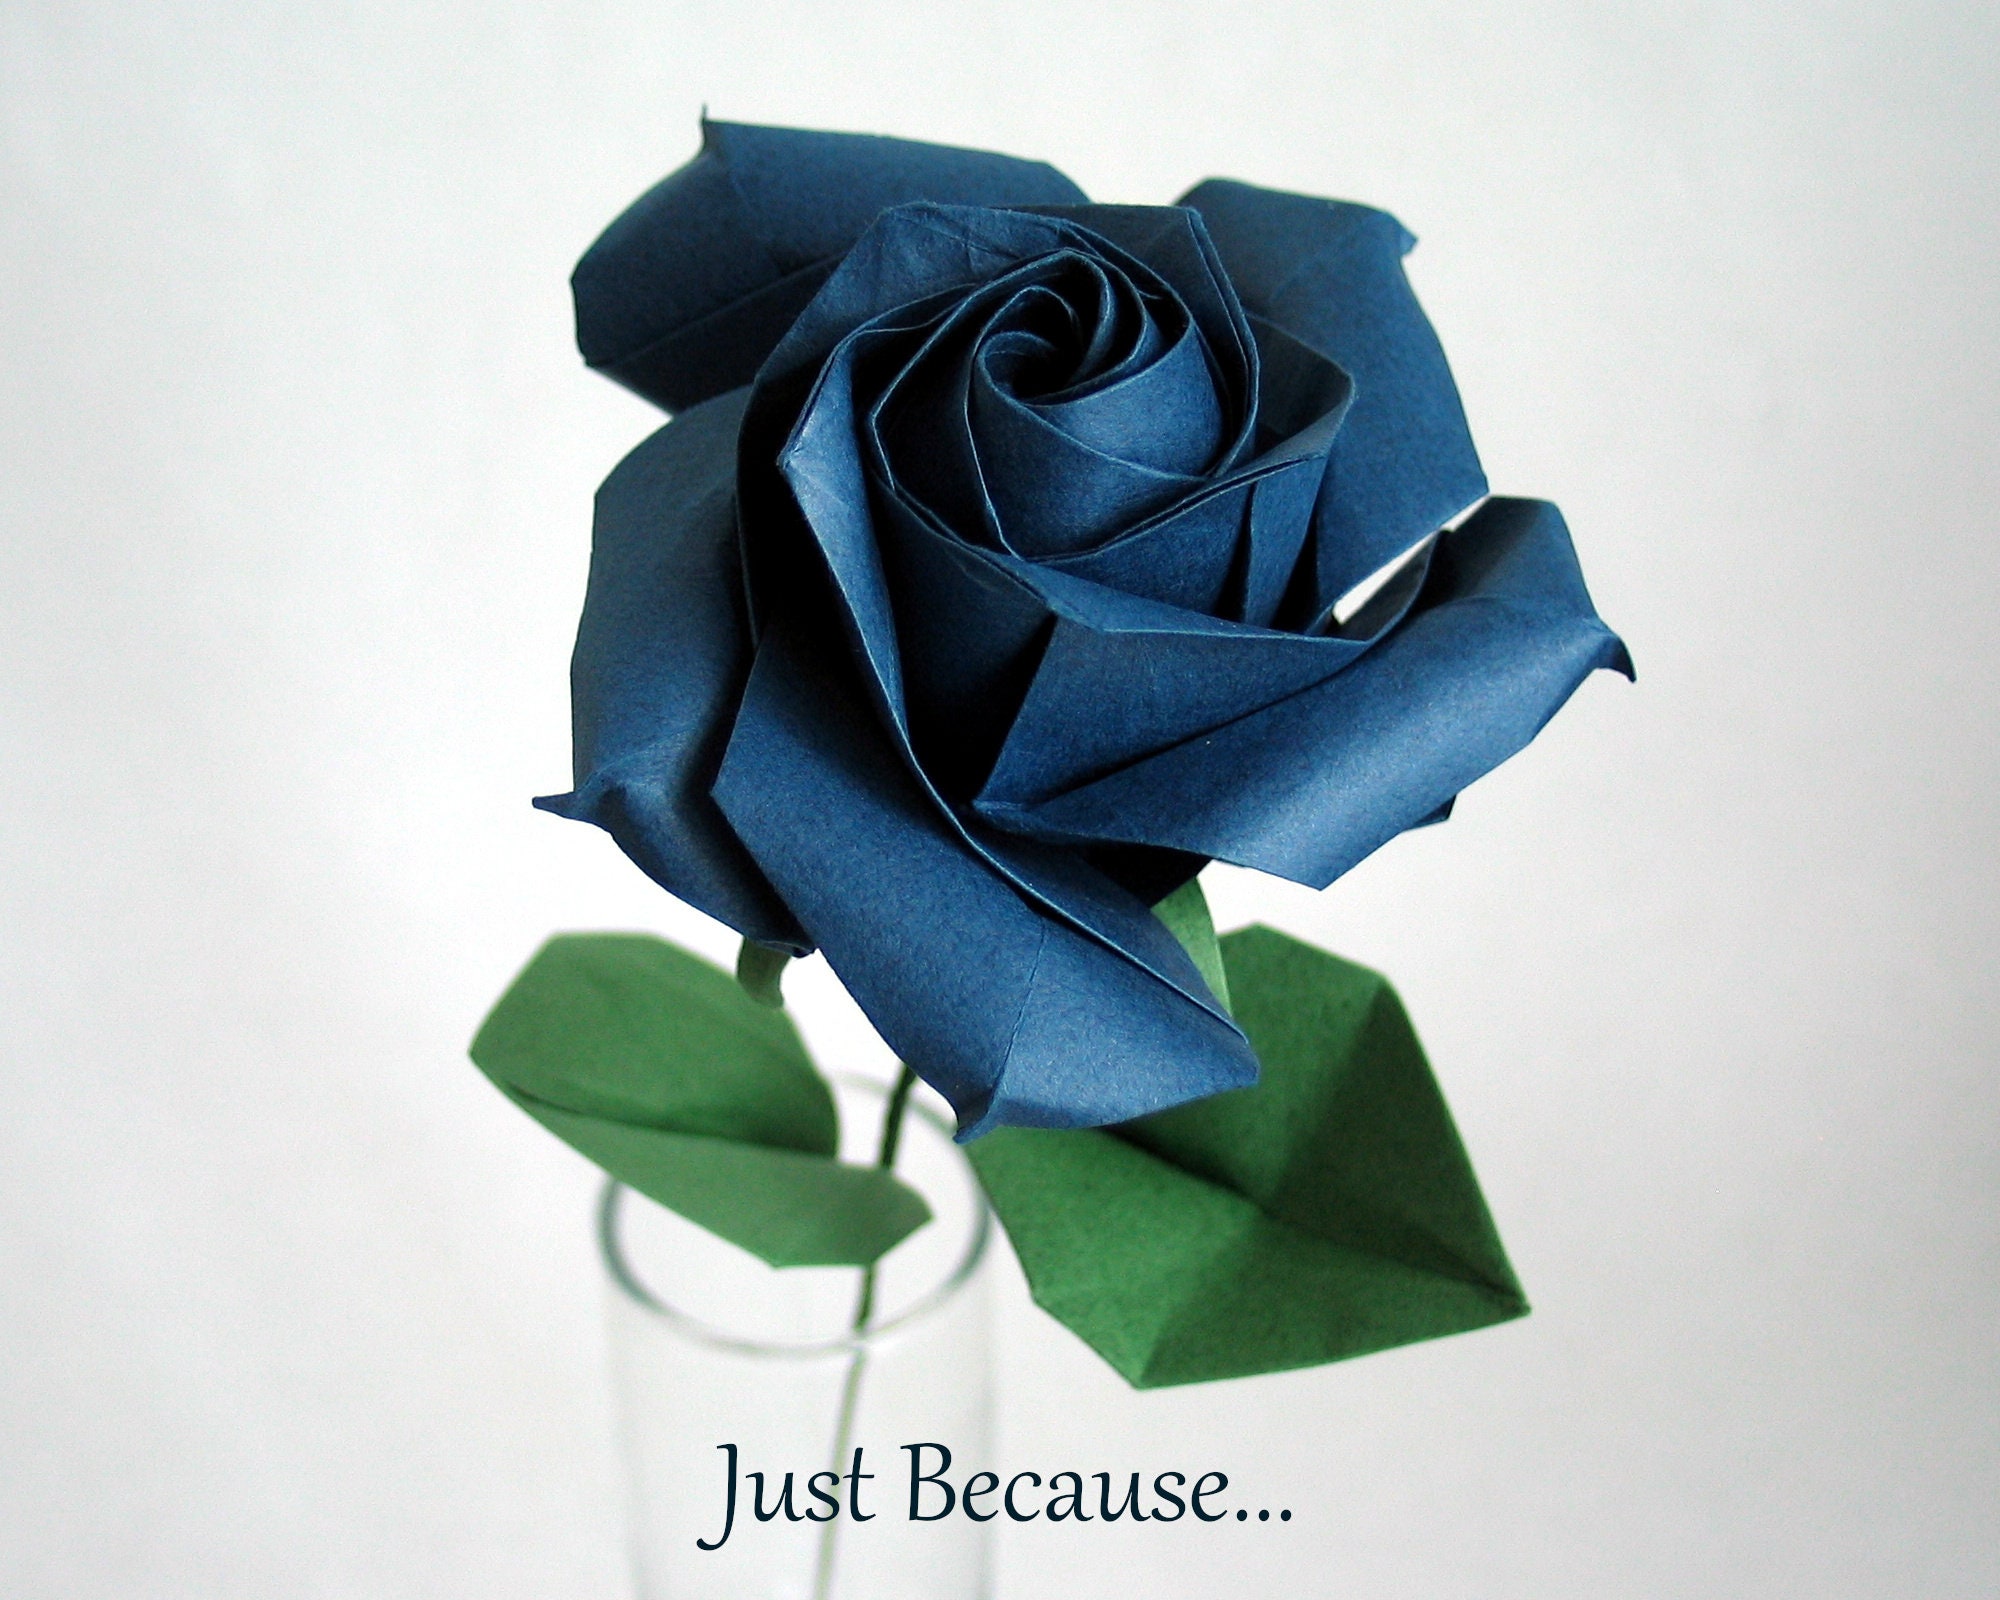 Easiest Origami Rose Ever! - How to Fold - Valentine's Day Gift 